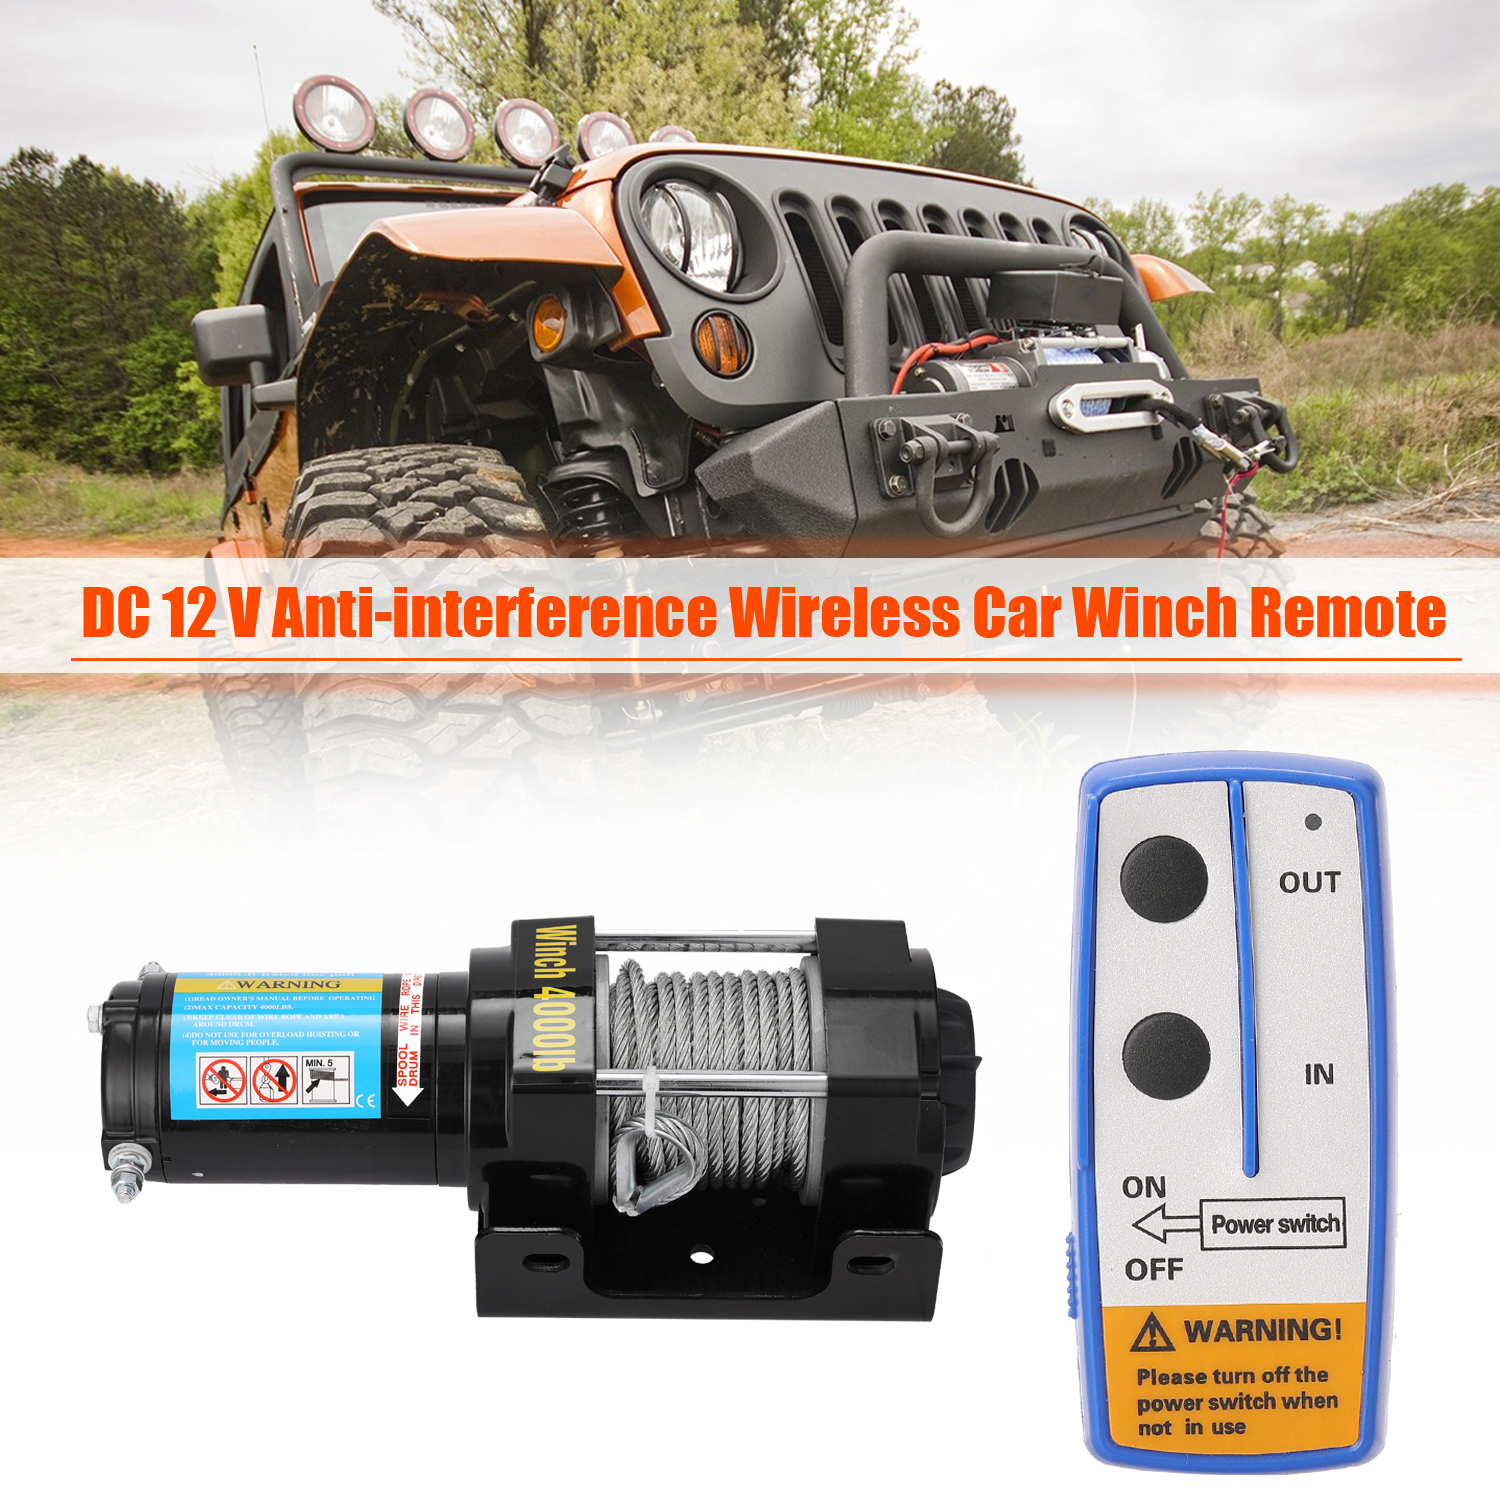 Electric Recovery Winch Kit 4000lbs лебедка ATV Trailer Truck Car DC12V Remote Control Winches cabrestante electrico 12v лебедка